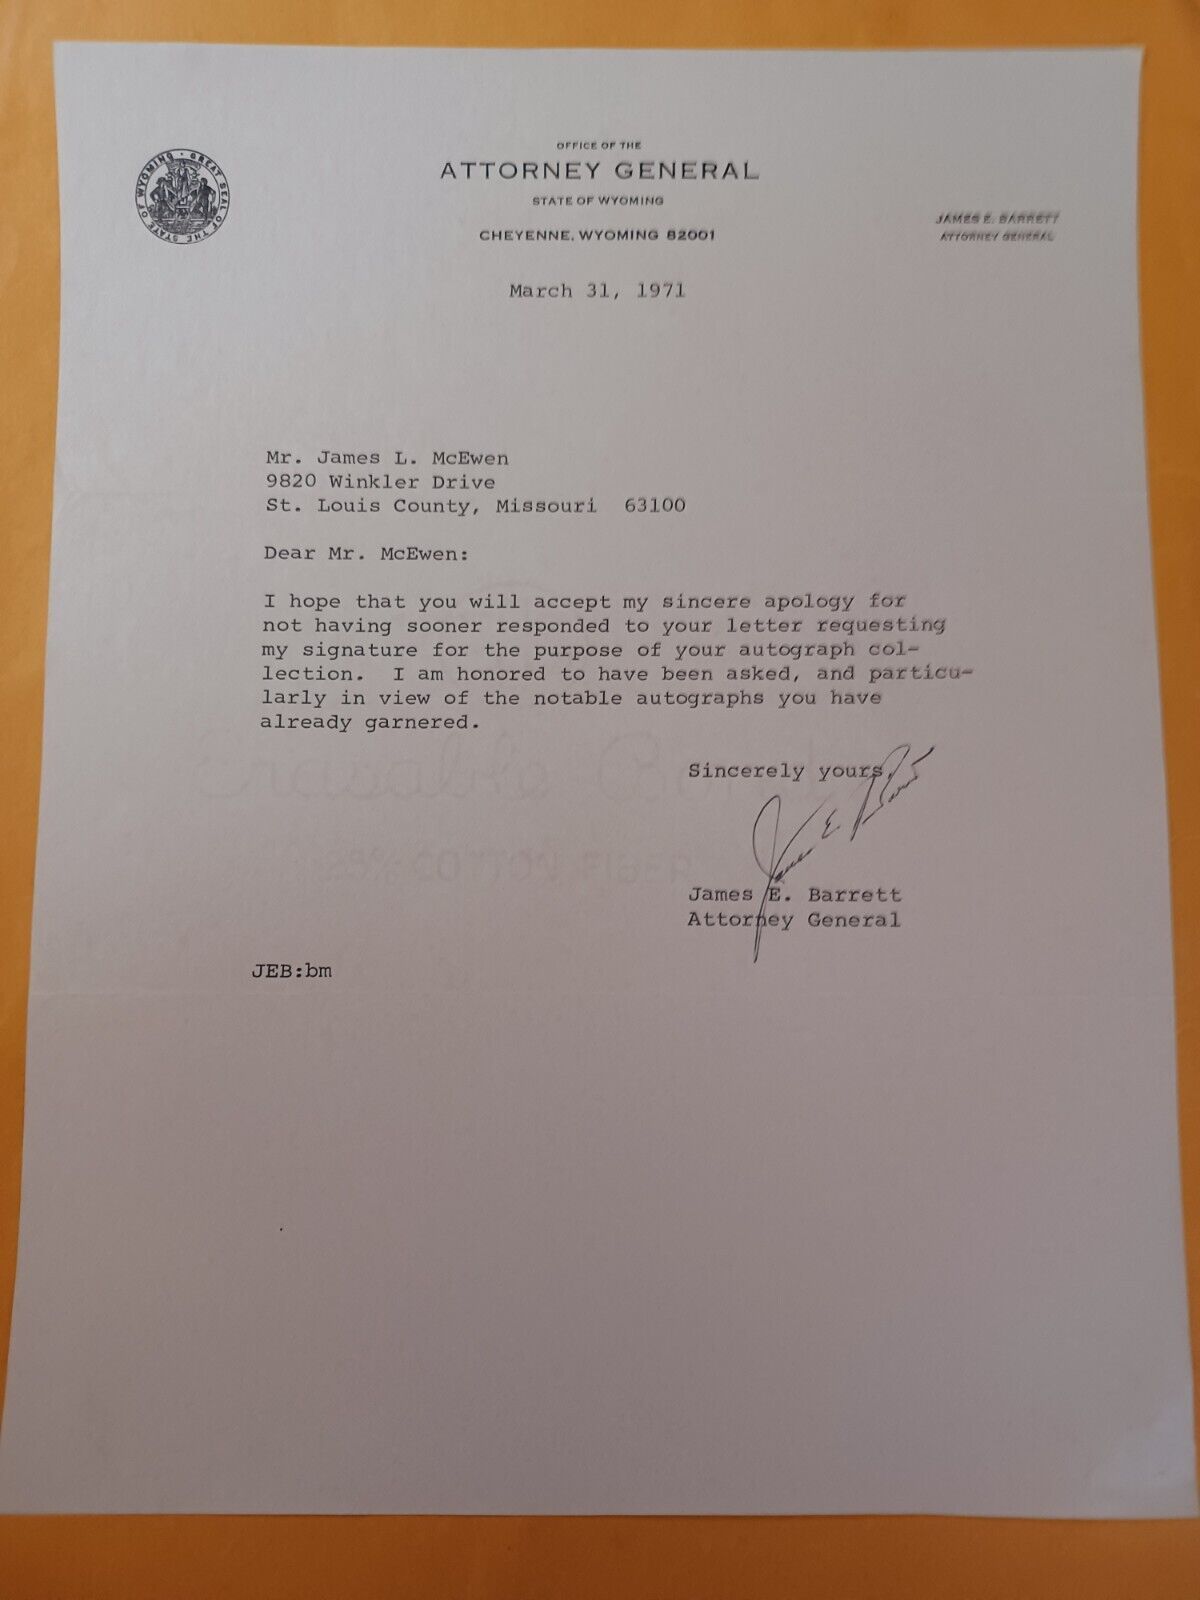 James E. Barrett (d. 2011) Signed 1971 Letter - Wyoming Attorney General - Judge